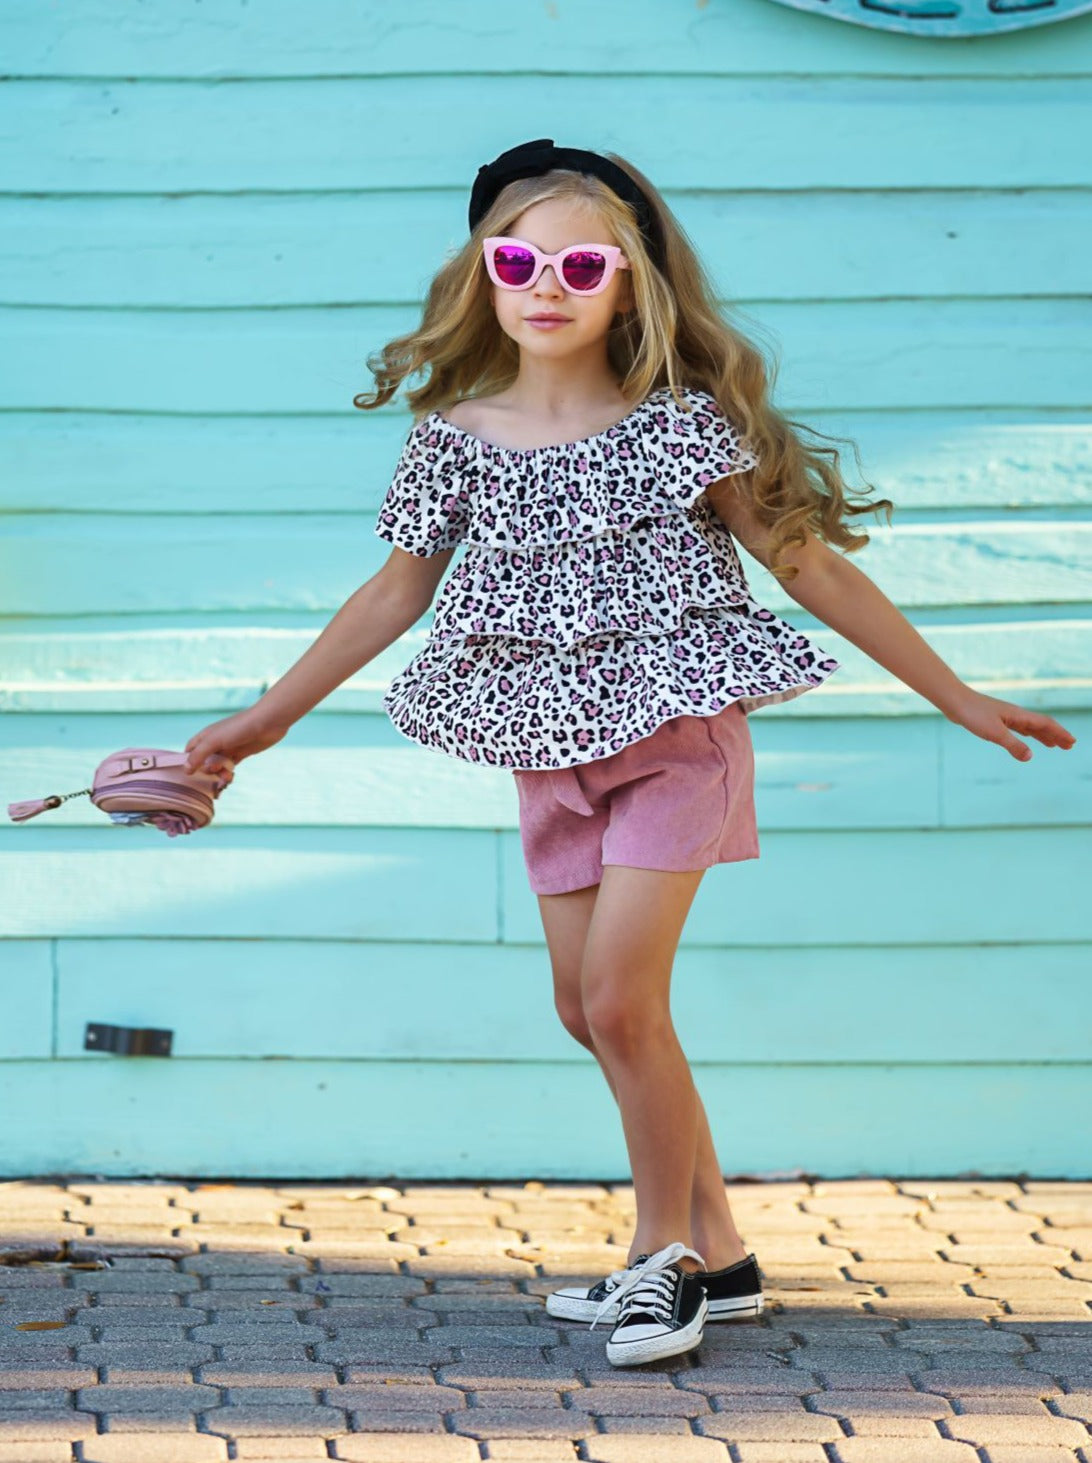 Spring Outfits | Girls Leopard Print Ruffle Top & Paperbag Shorts Set